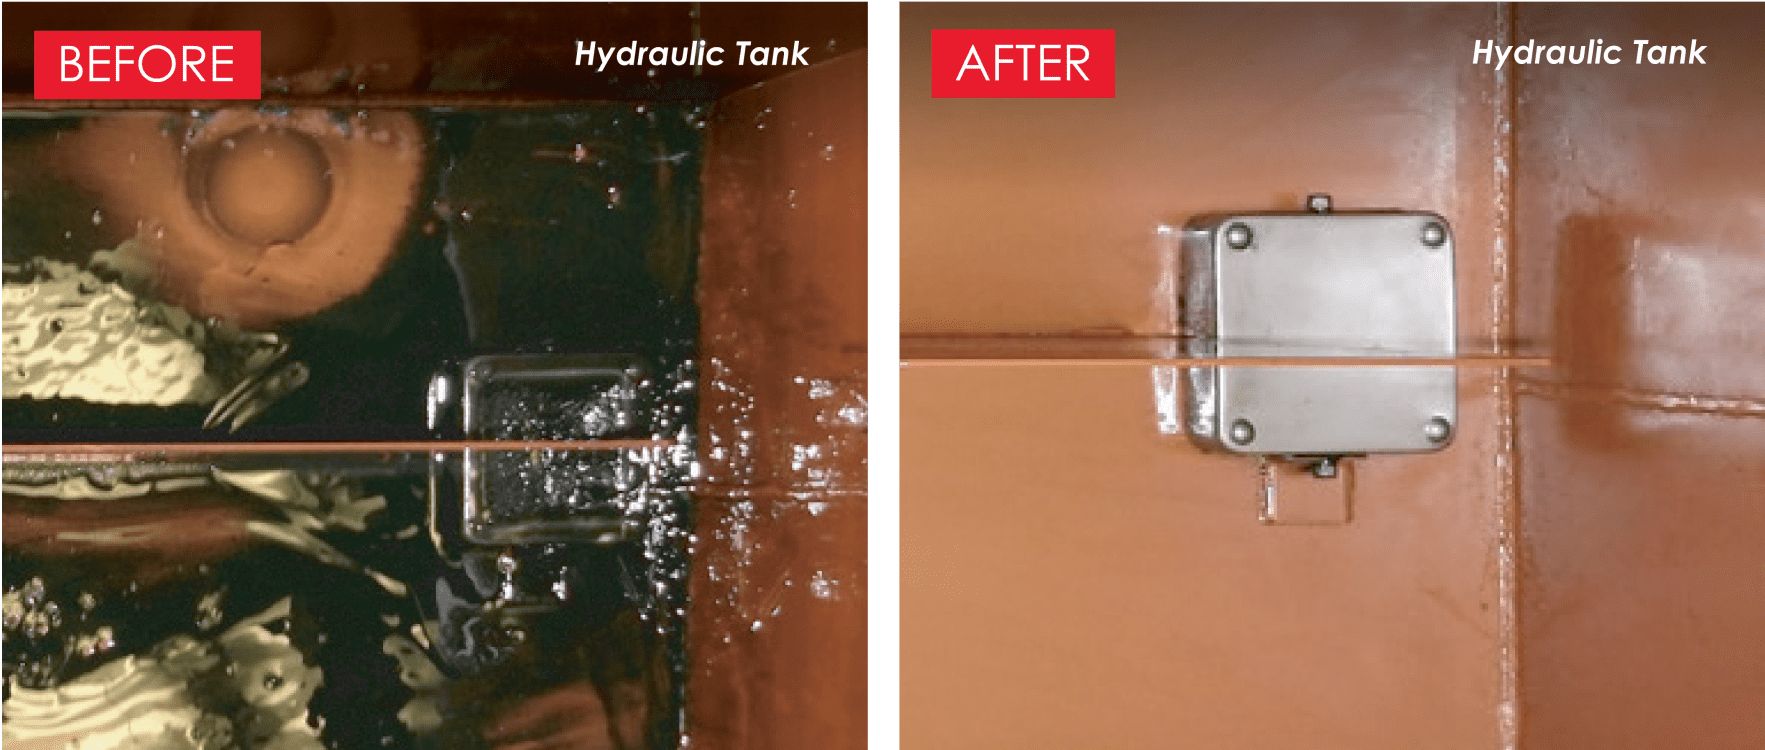 Before and after of a hydraulic tank